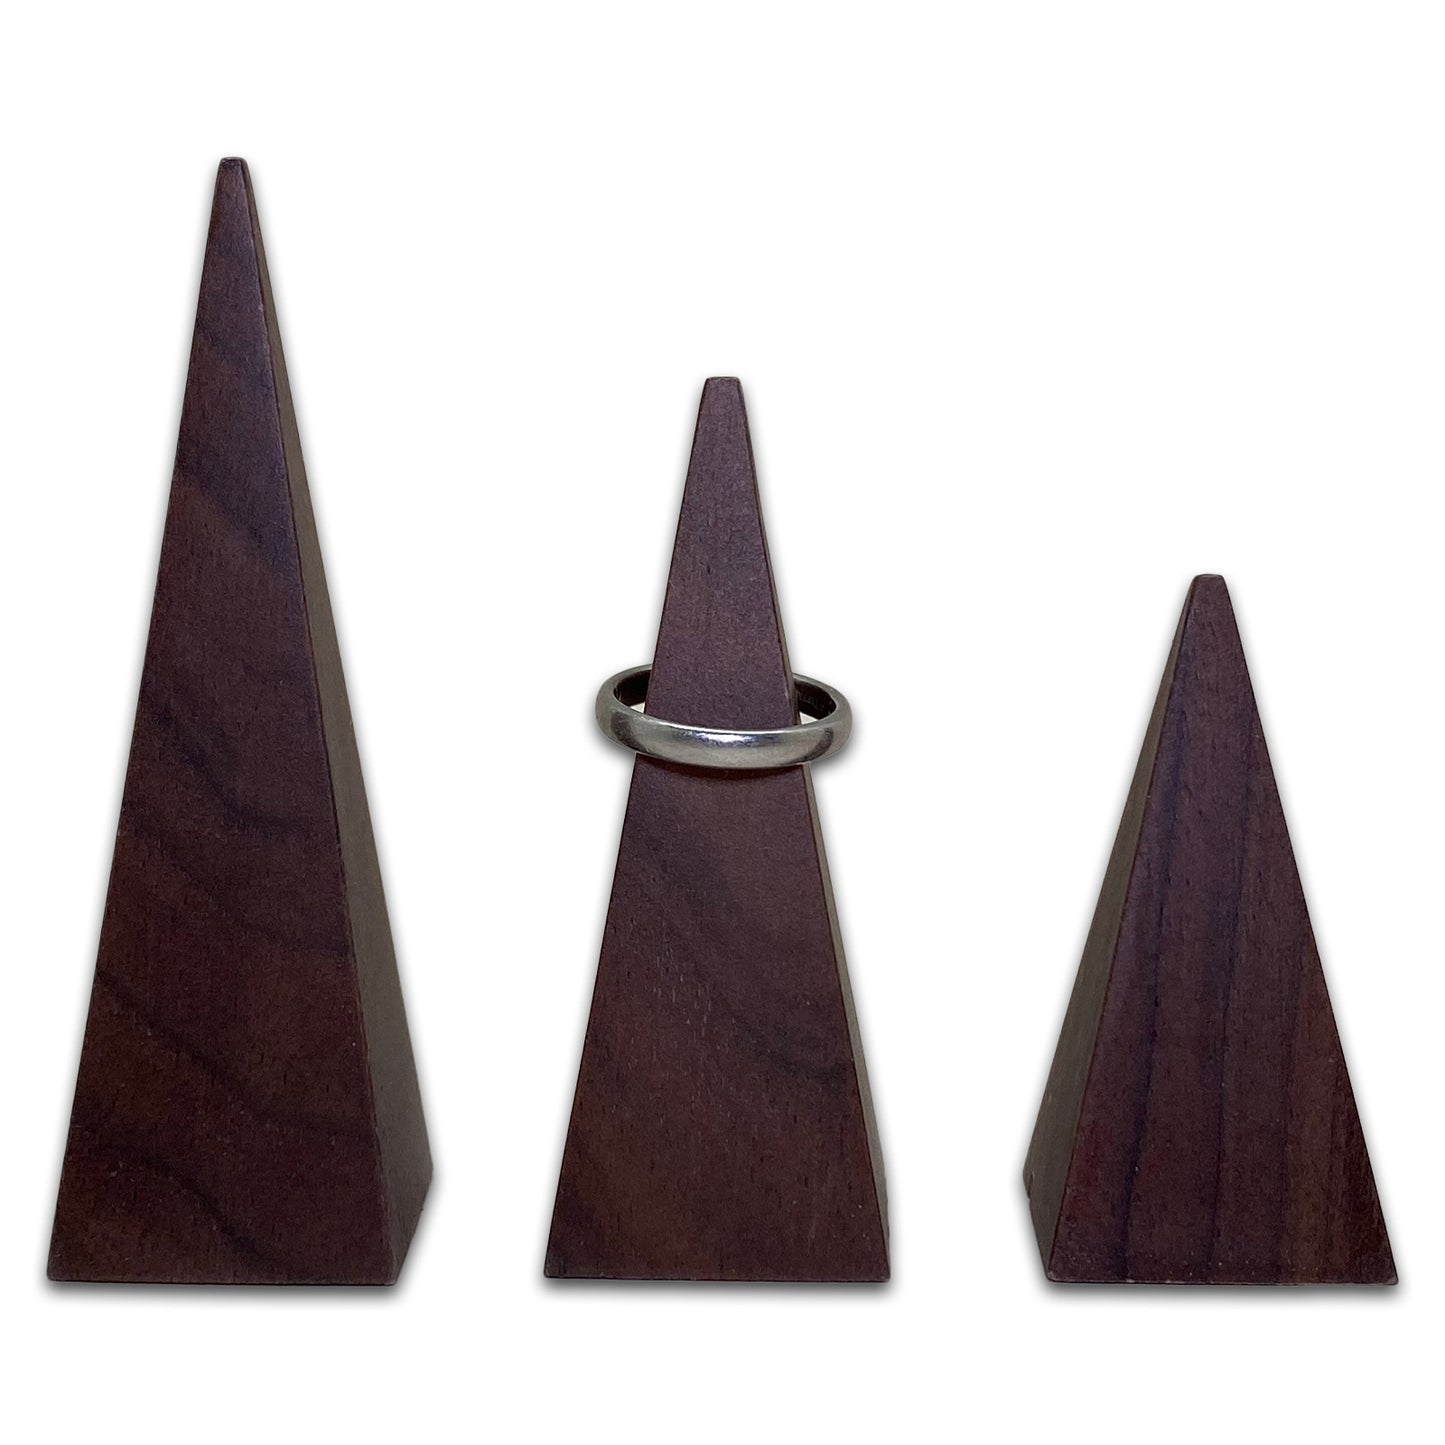 3 Piece Tiered Wood Pyramid Ring Stand Display